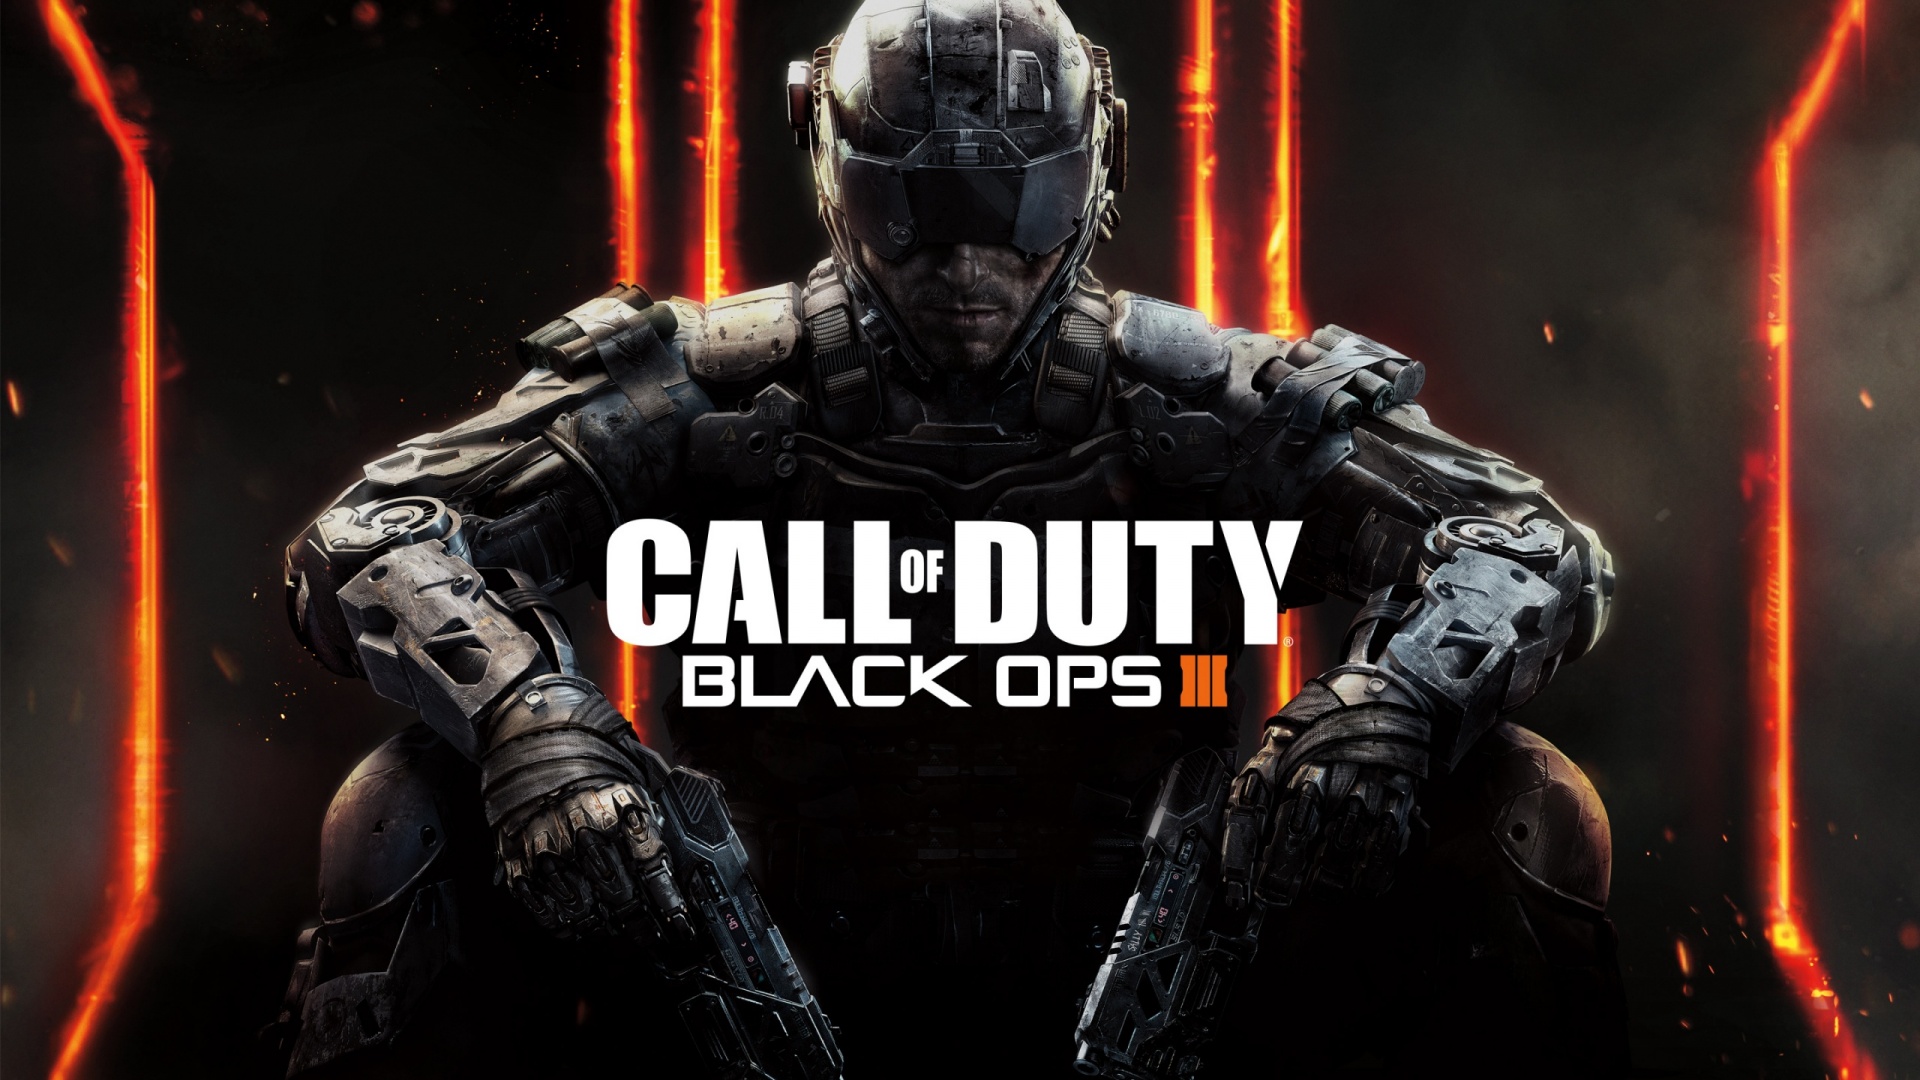 Call Of Duty: Black Ops 3 PC Game Latest Version Free Download